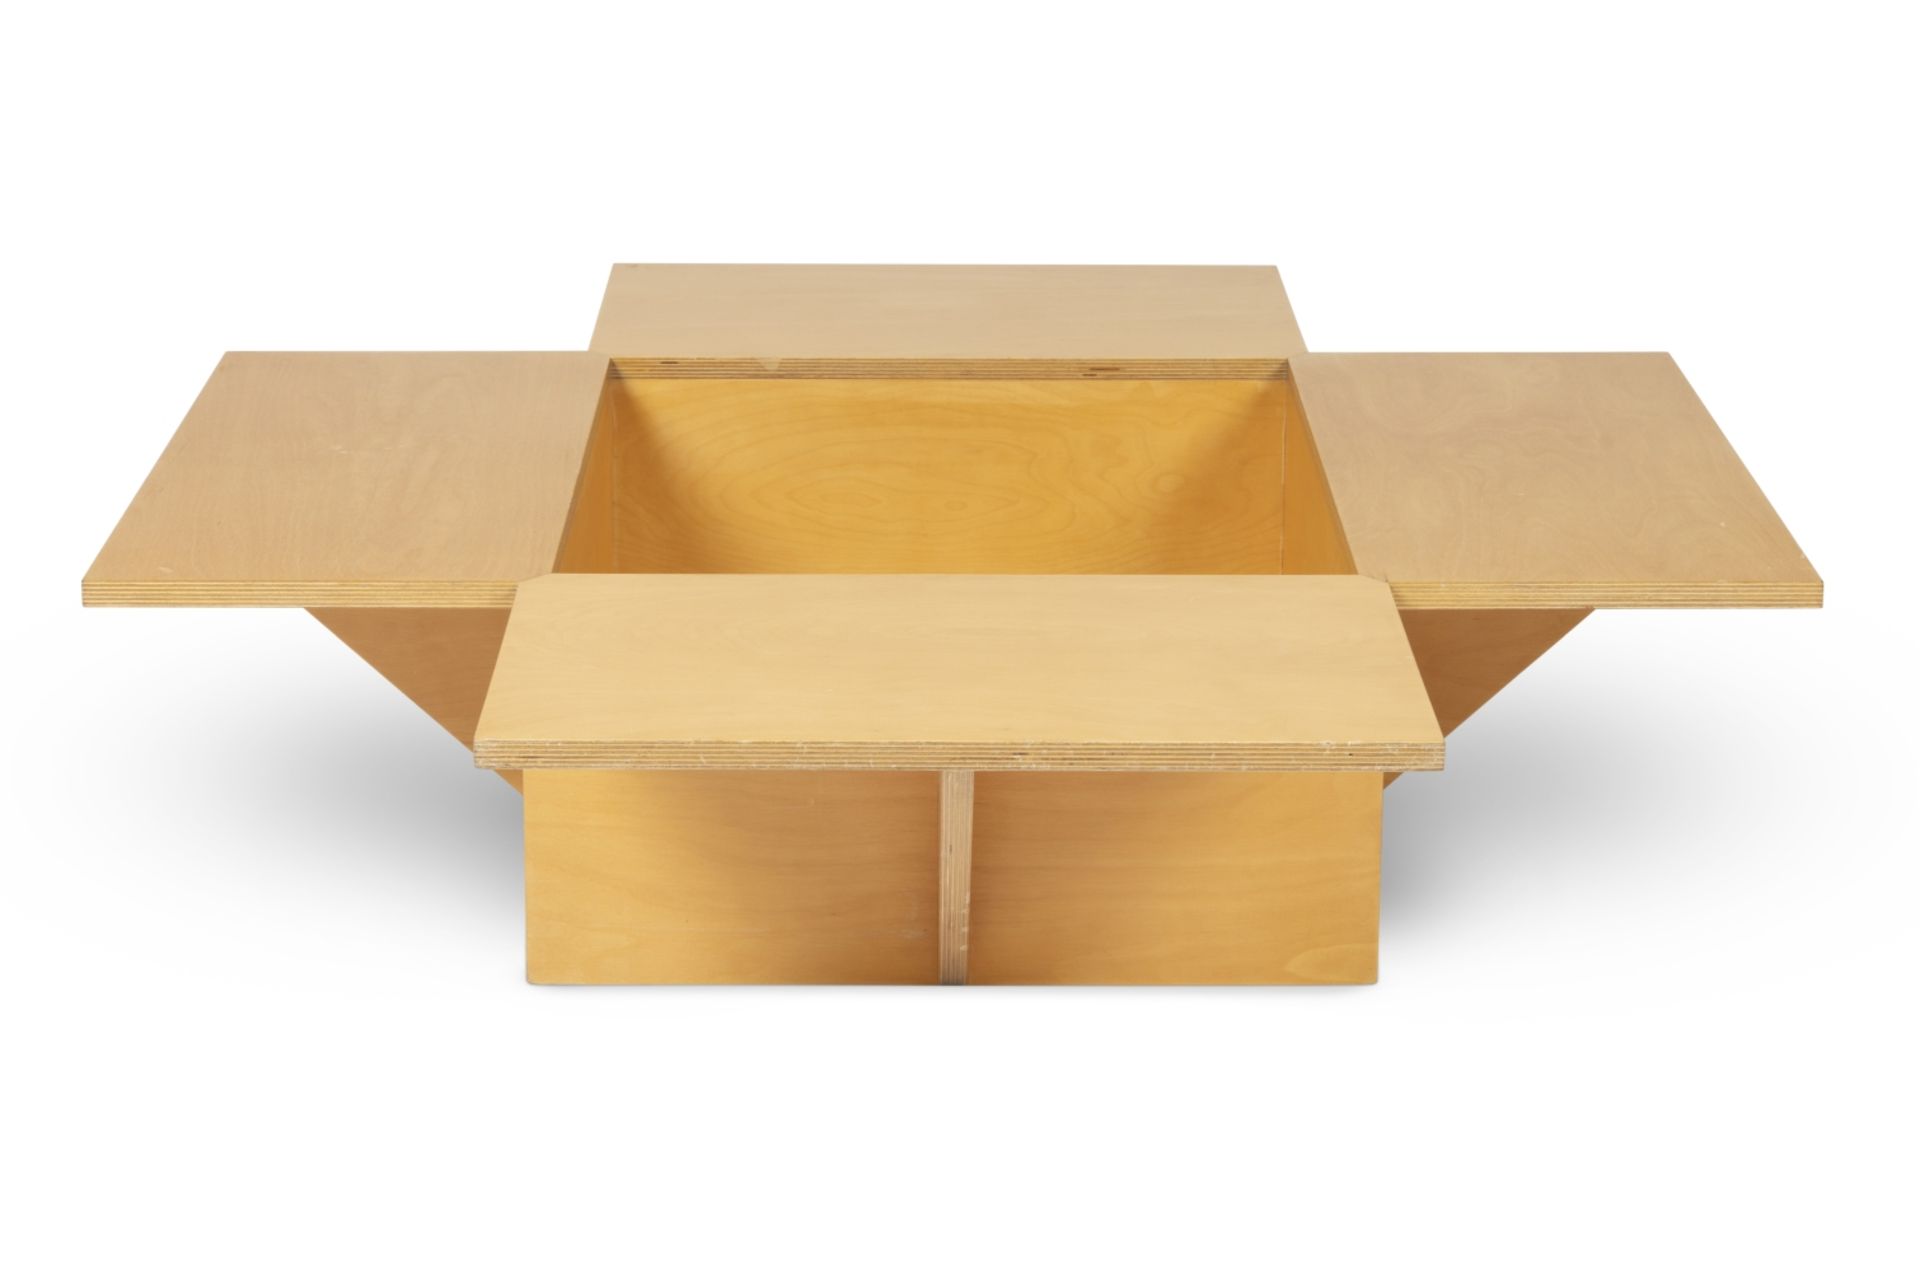 A 'Box' birch plywood occasional tableDesigned by Sir Terence Conran, made by Benchmark Furniture